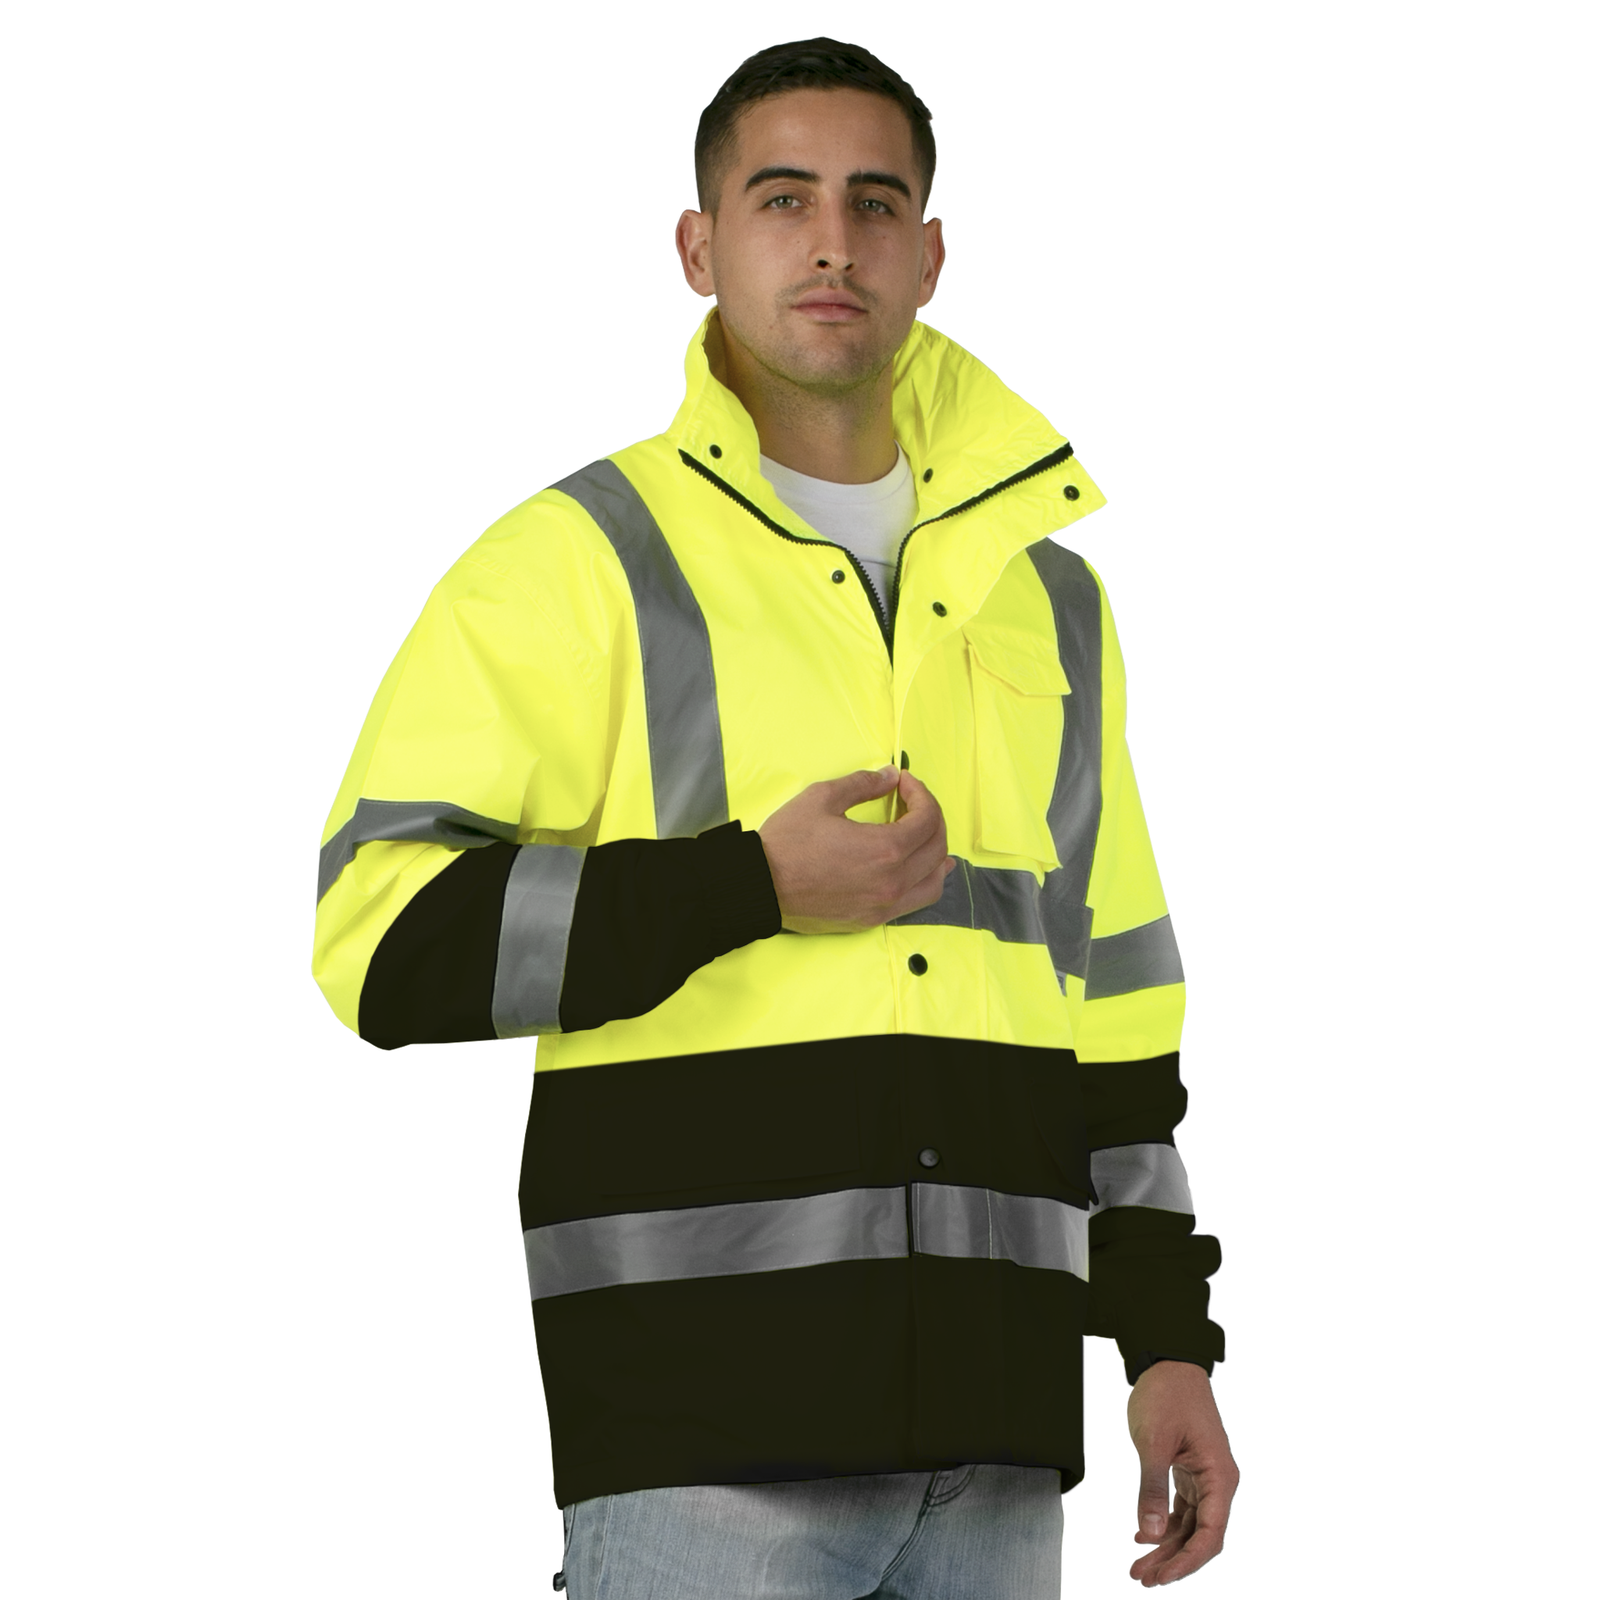 Man wearing the yellow and black high visibility rain jacket